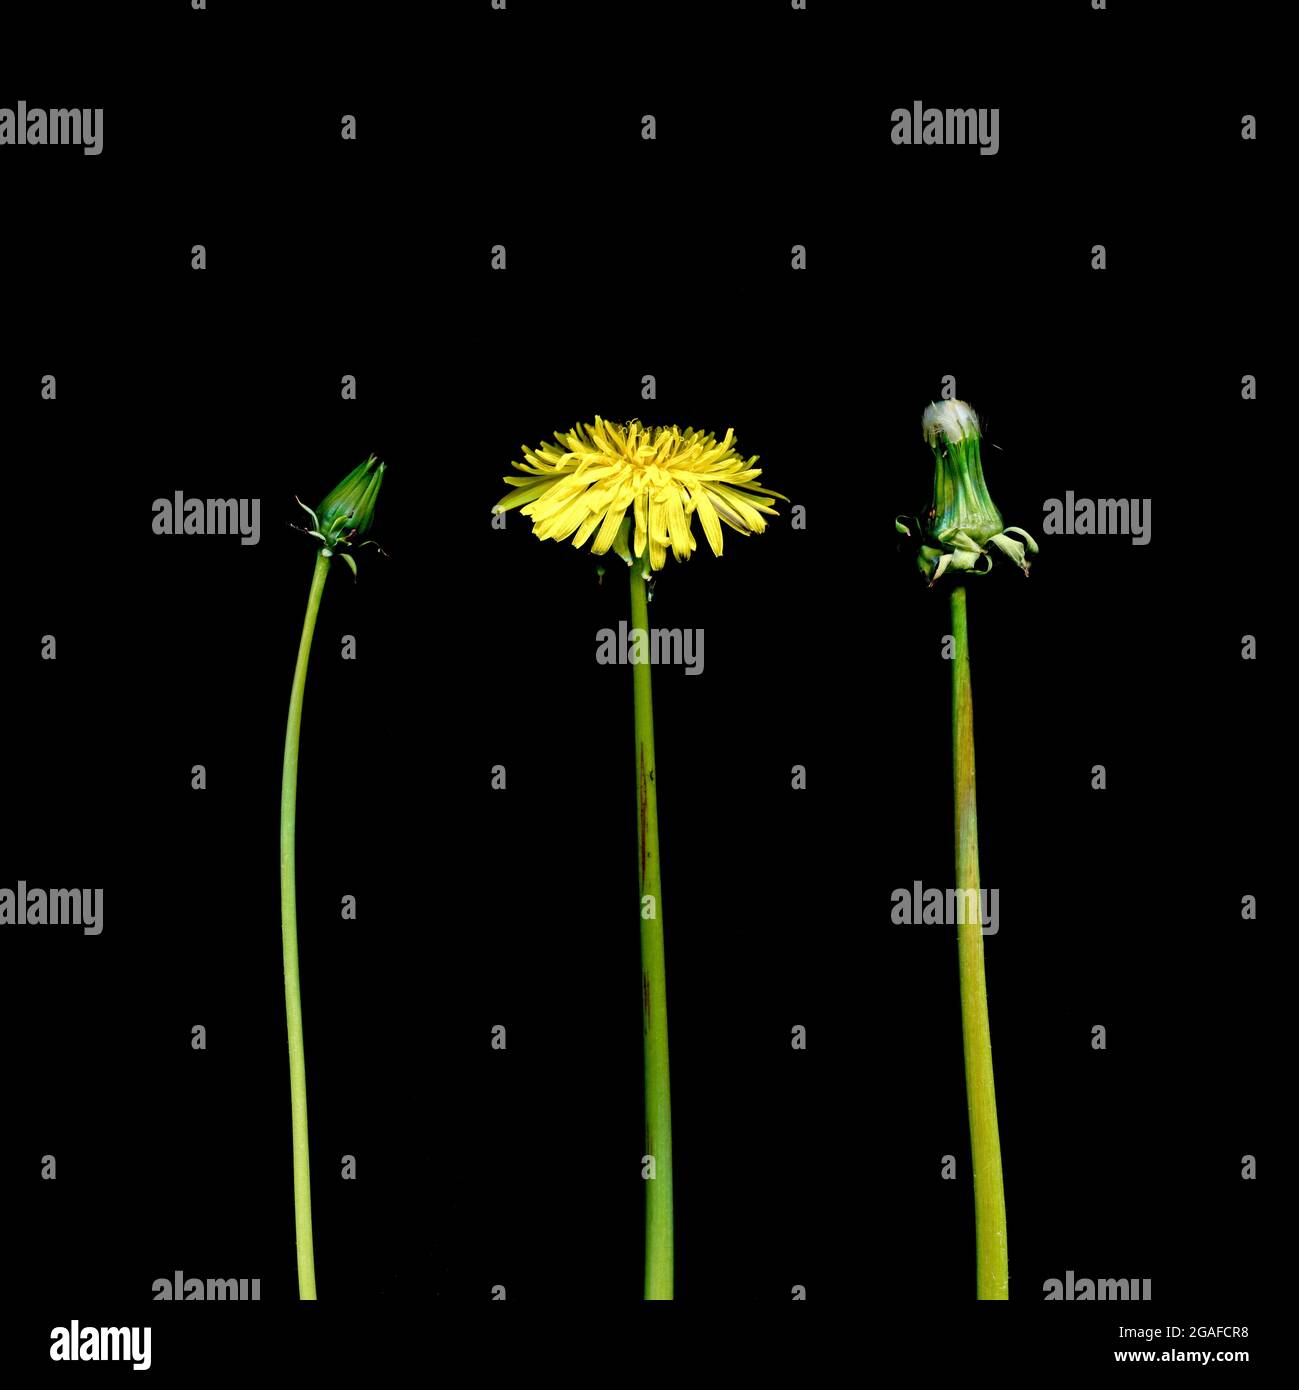 Three dandelions, Taraxacum officianalis, in different stages of flowering. Stock Photo